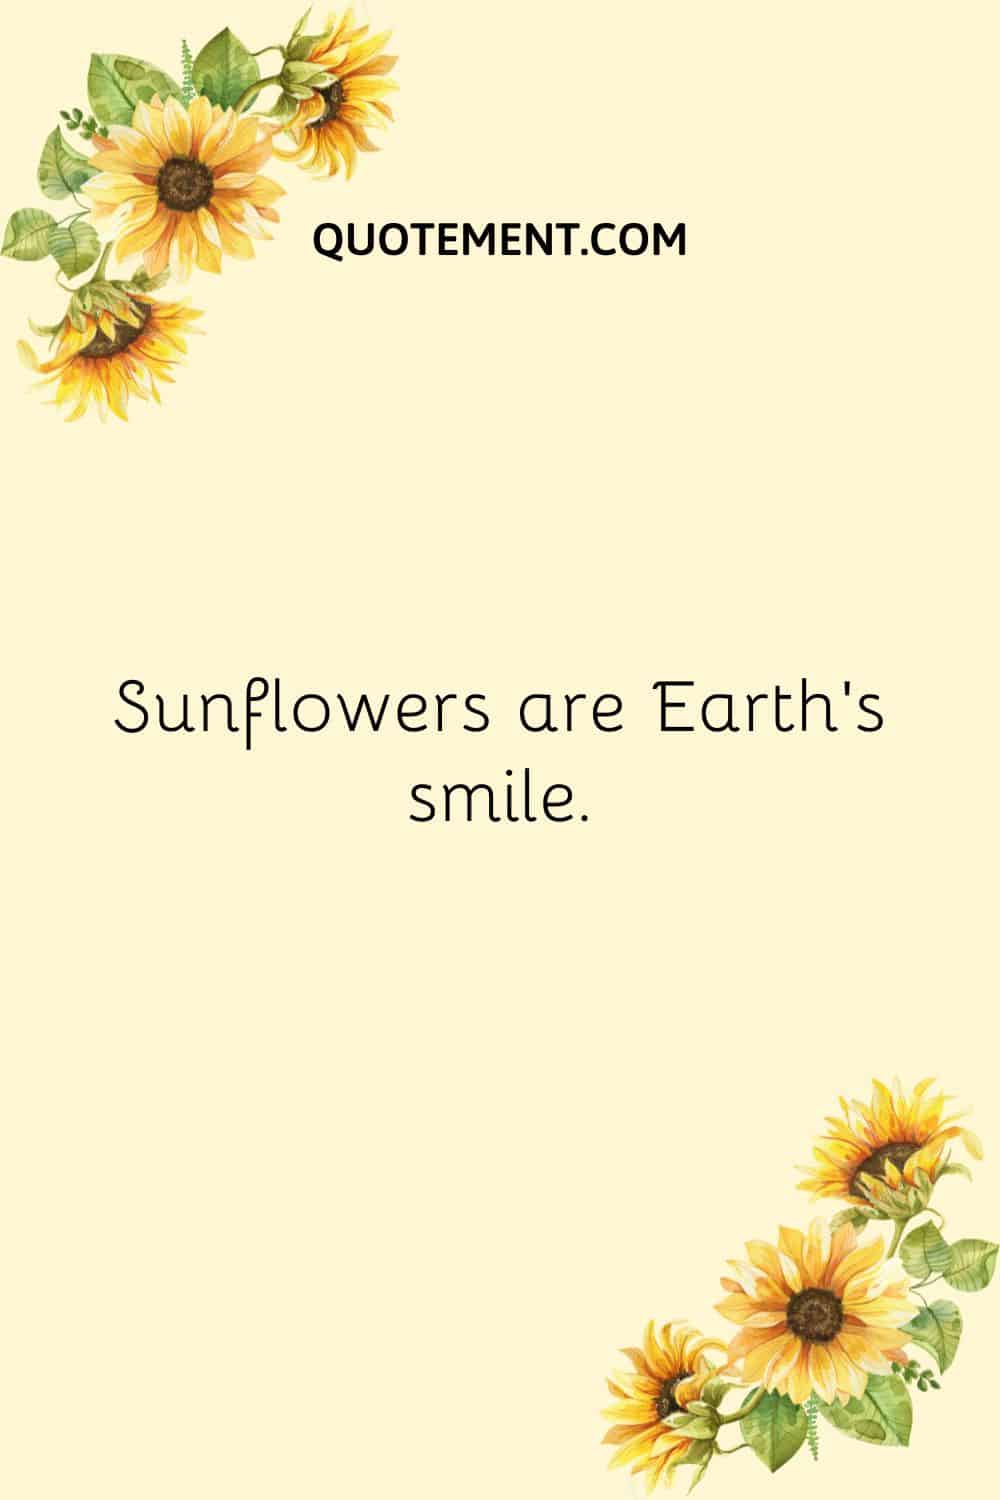 Sunflowers are Earth’s smile.